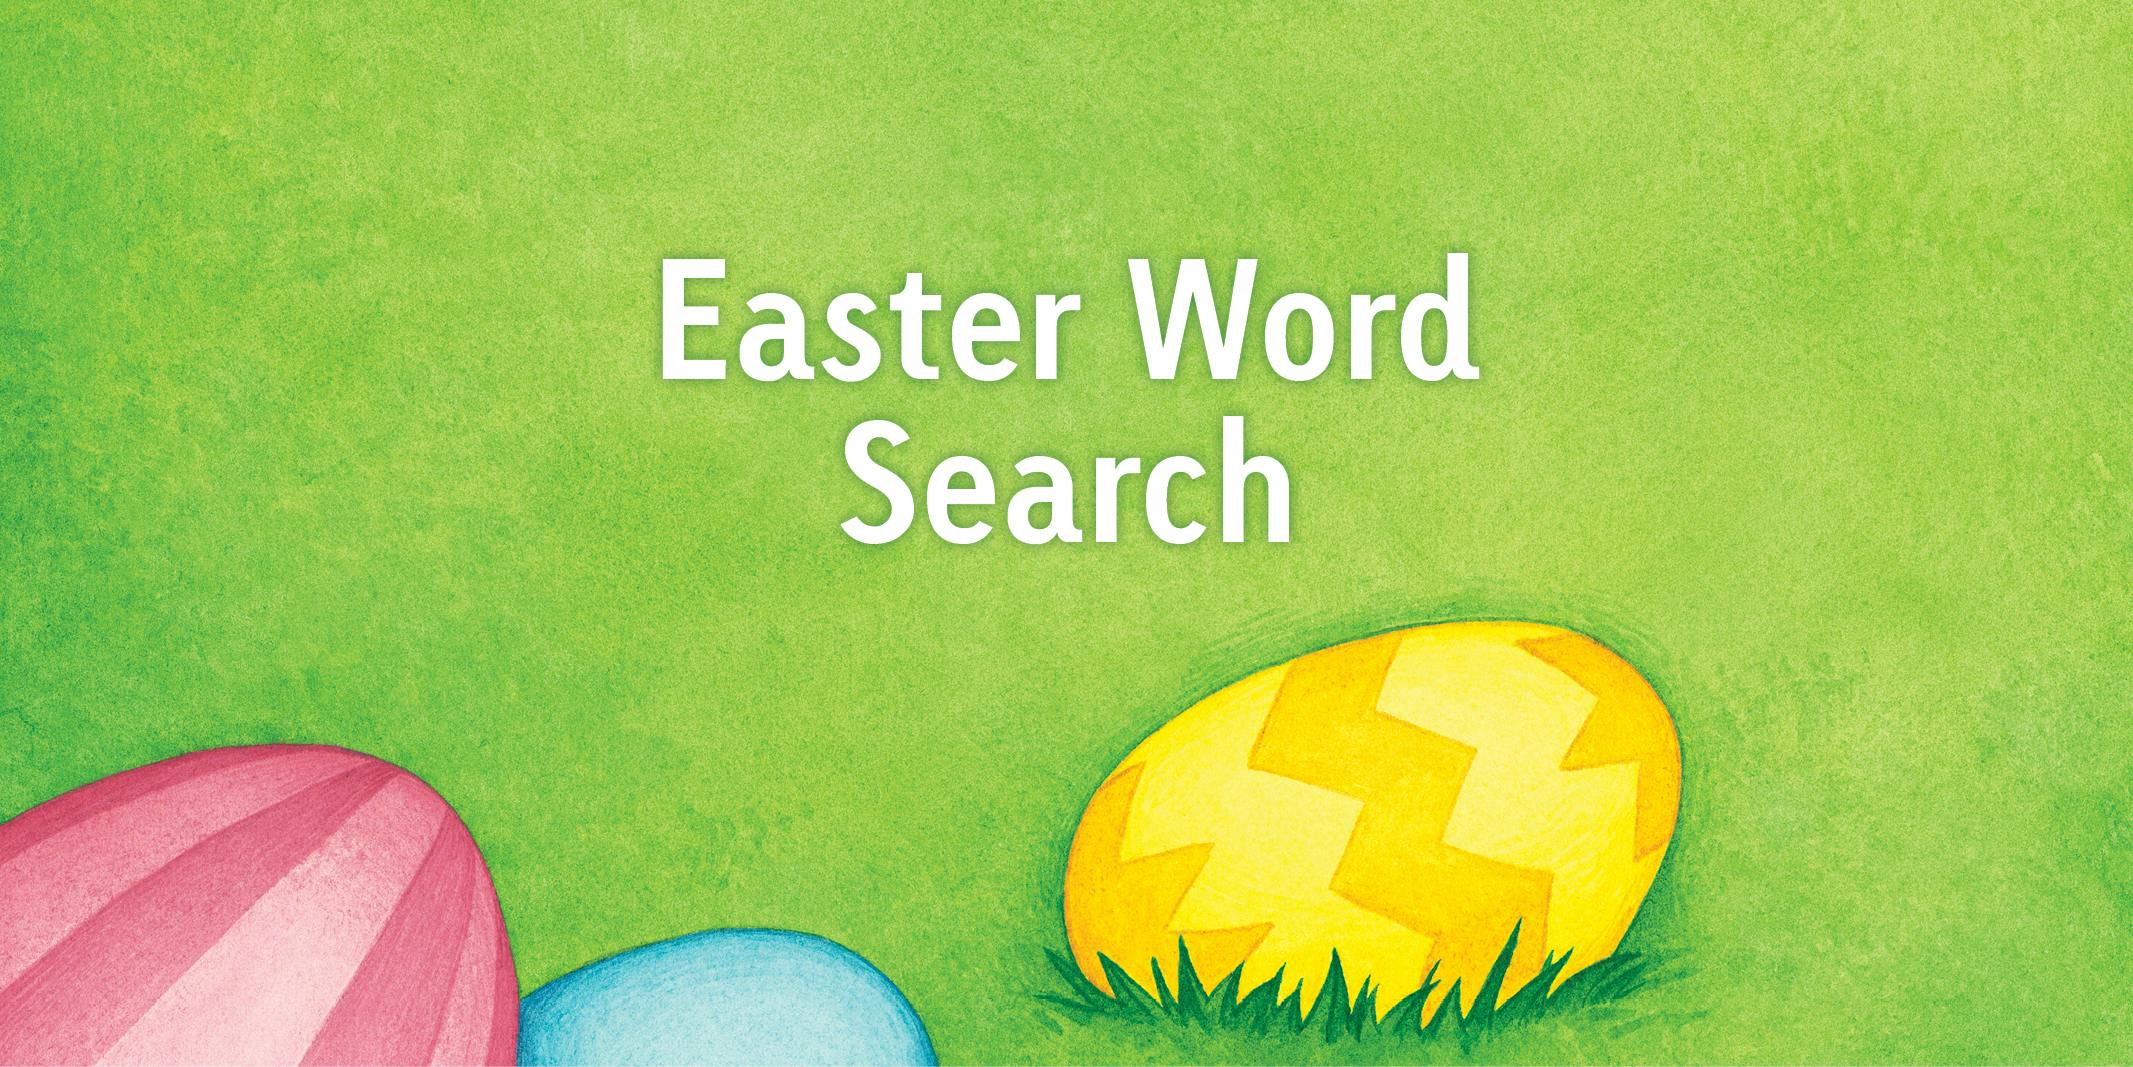 Granny McFlitter's Excellent Easter Word Search